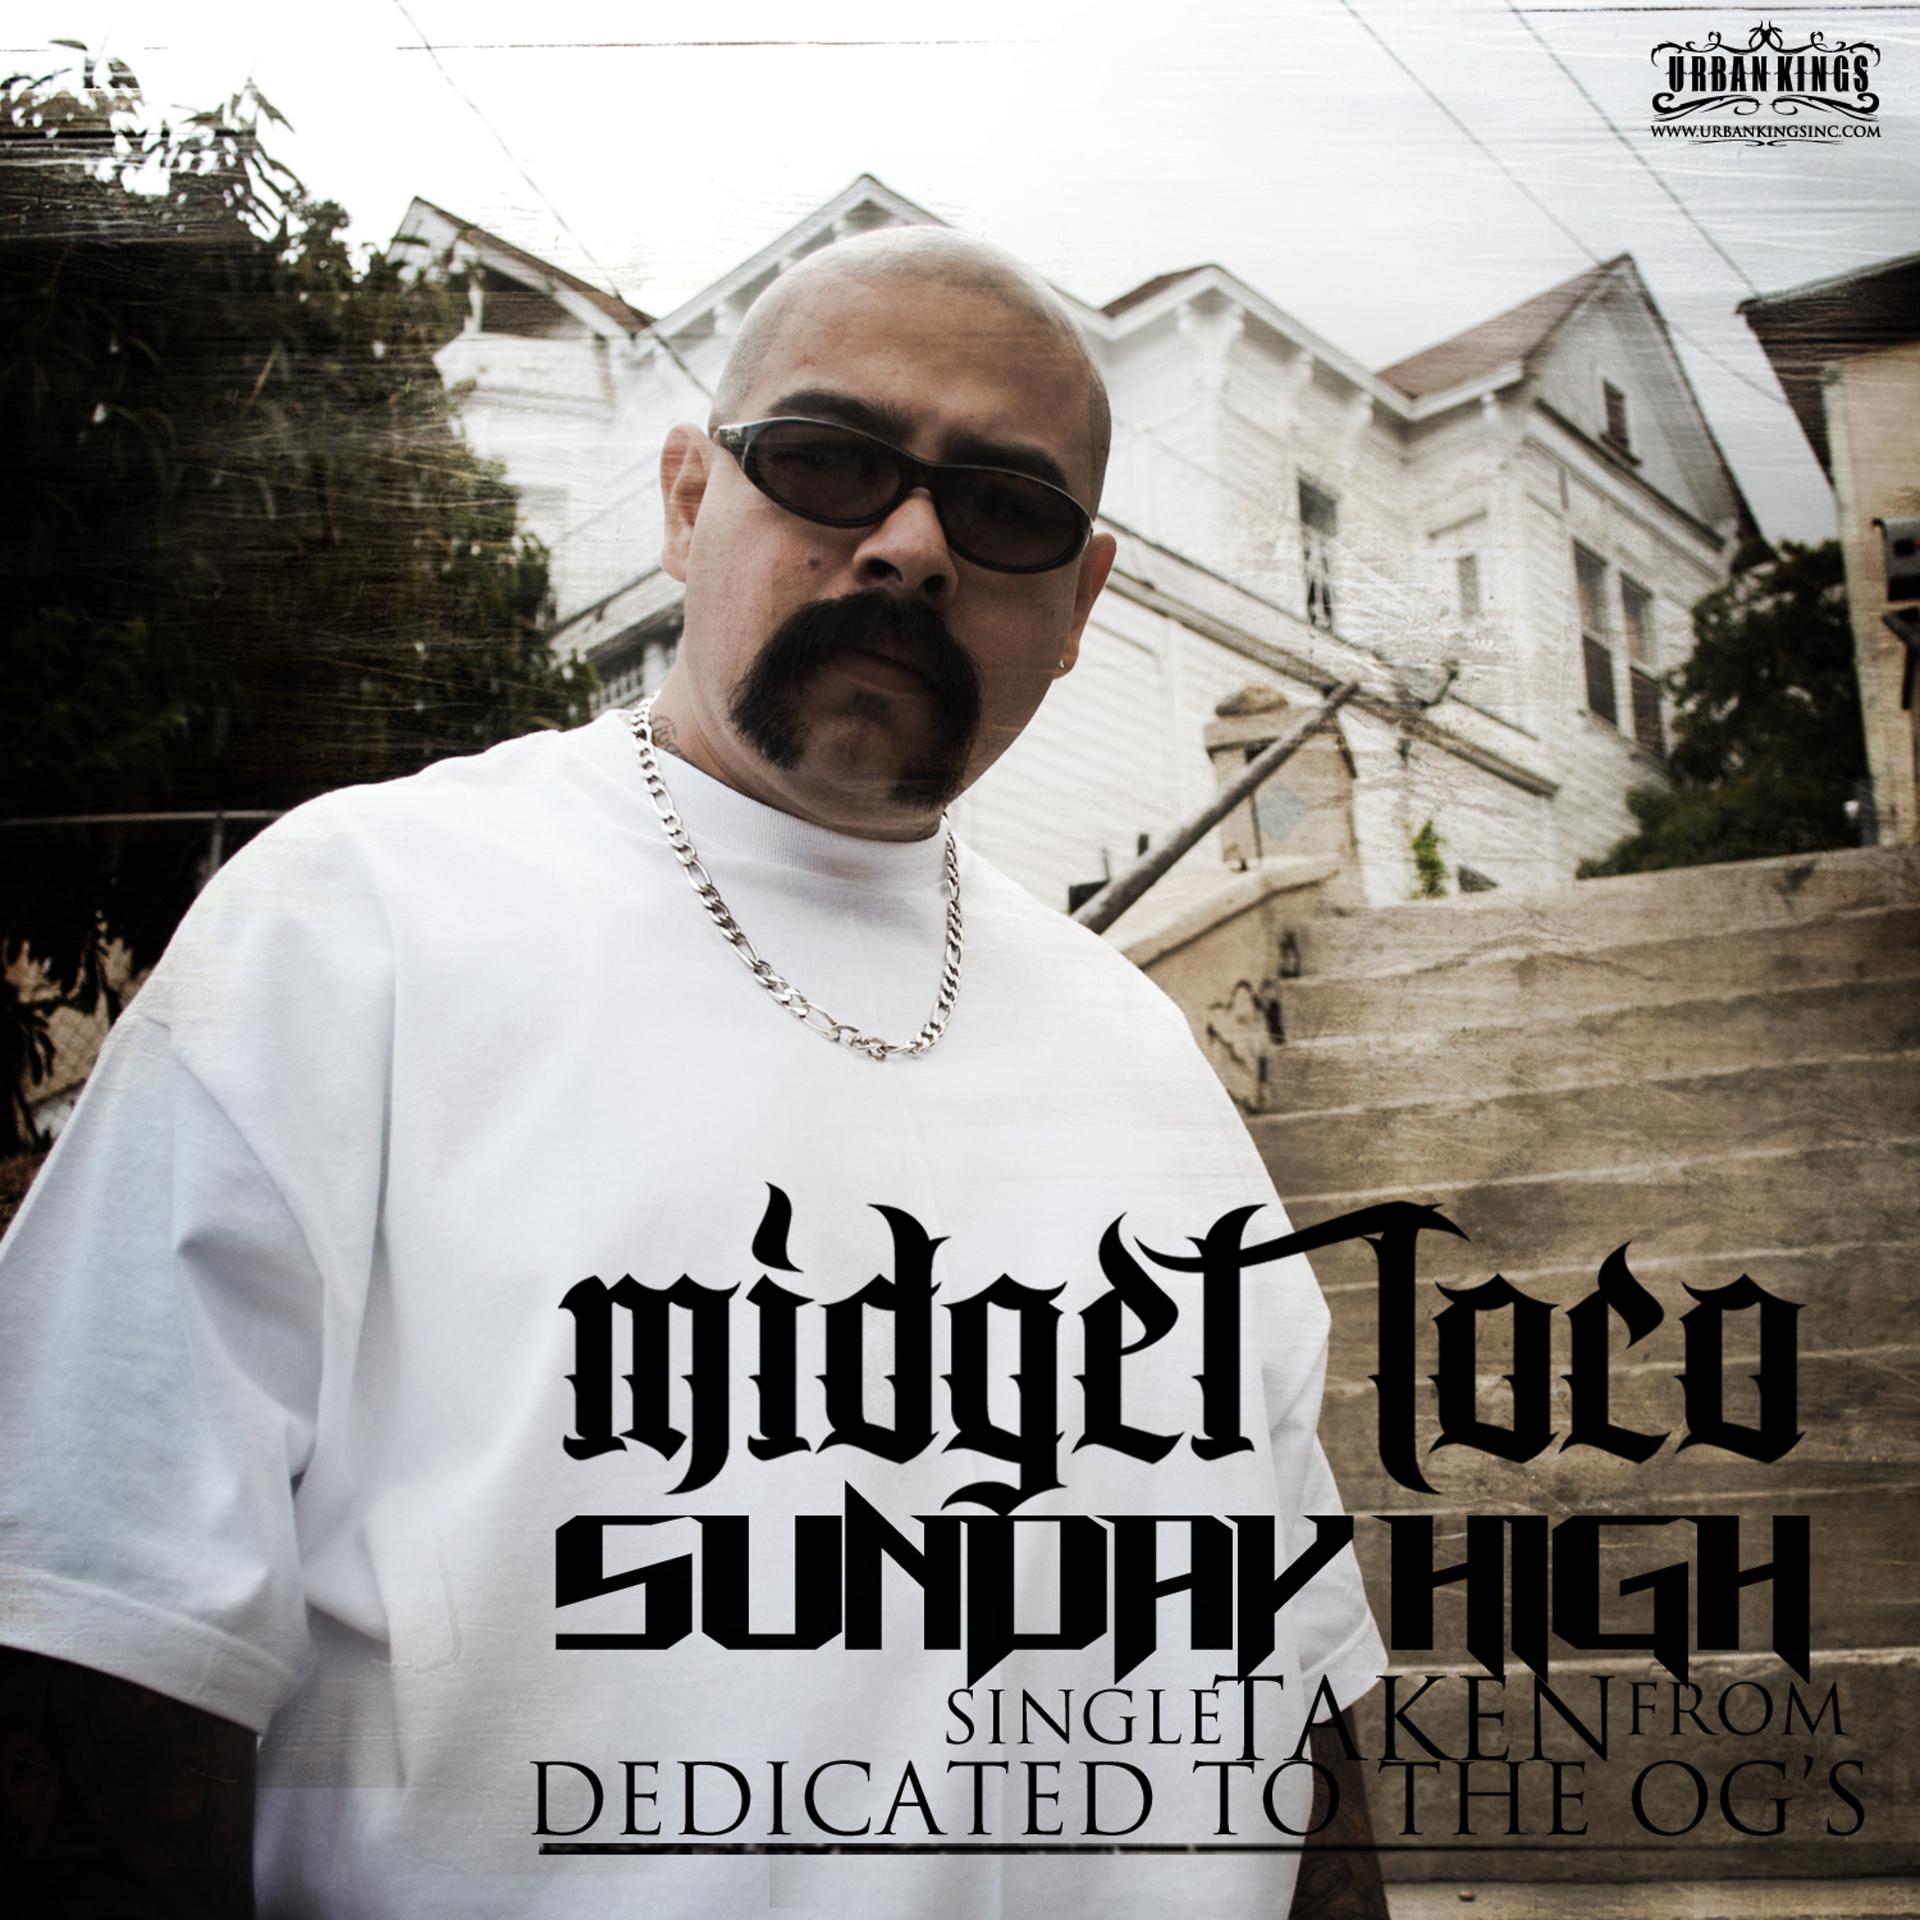 Постер альбома "Sunday High" First Single Taken From "Dedicated To The Og's"